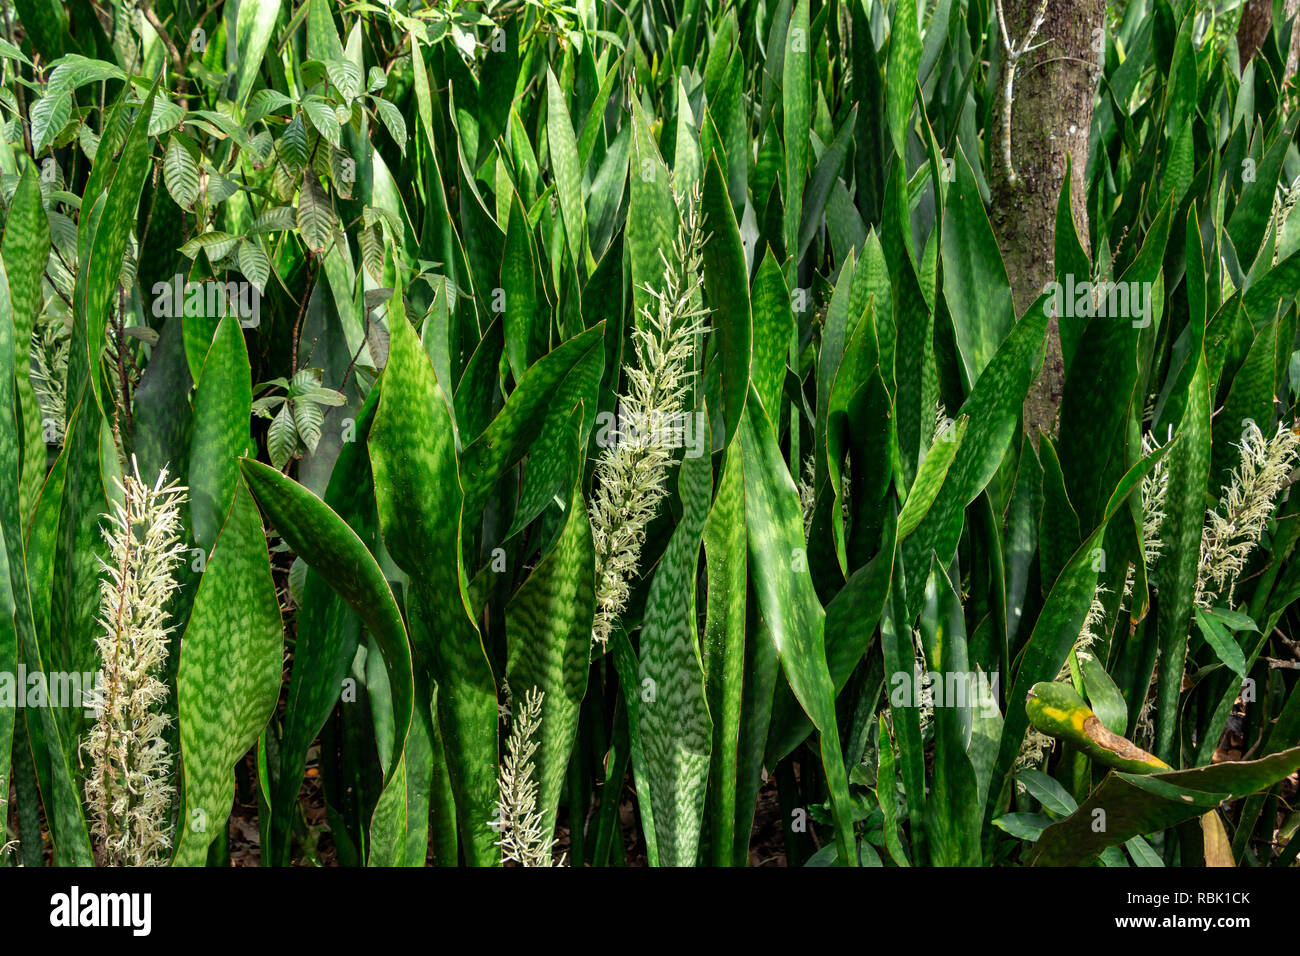 Mother-in-laws tongue a.k.a. snake plant (Sansevieria hyacinthoides) flowers - Pine Island Ridge Natural Area, Davie, Florida, USA Stock Photo